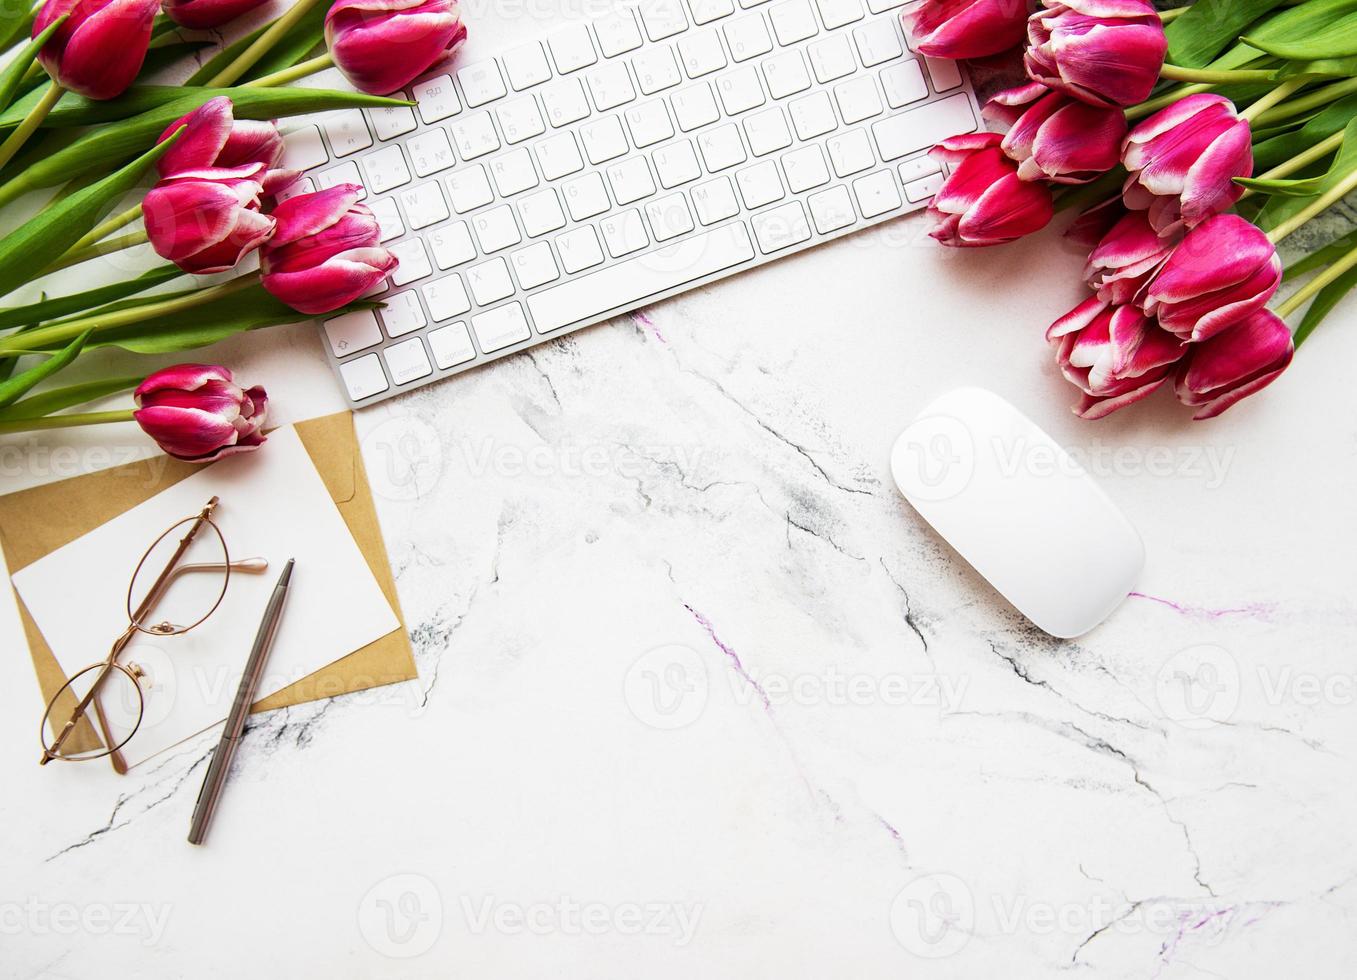 Workspace with keyboard and tulips photo